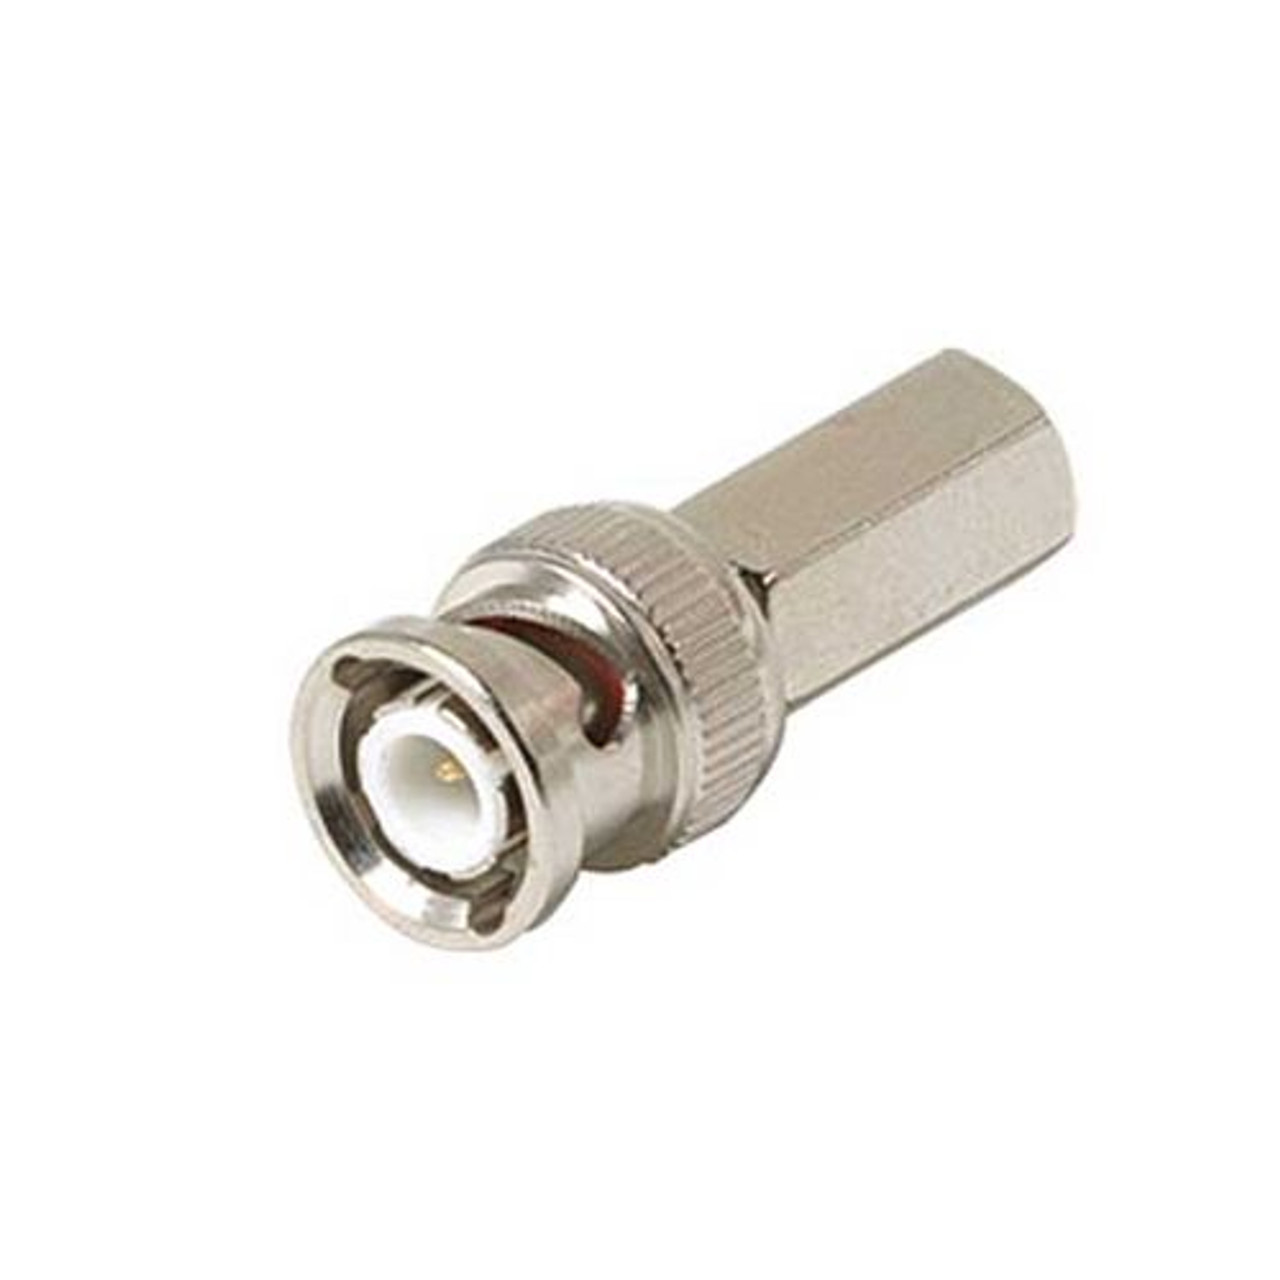 Steren 200-142-10 Twist-On RG59 BNC Connectors Male Twist-On Coaxial Adapter RG-59 Connector One Piece Design Audio Video Data Signal Component Device Communication 10 Pack, Part # 200142-10